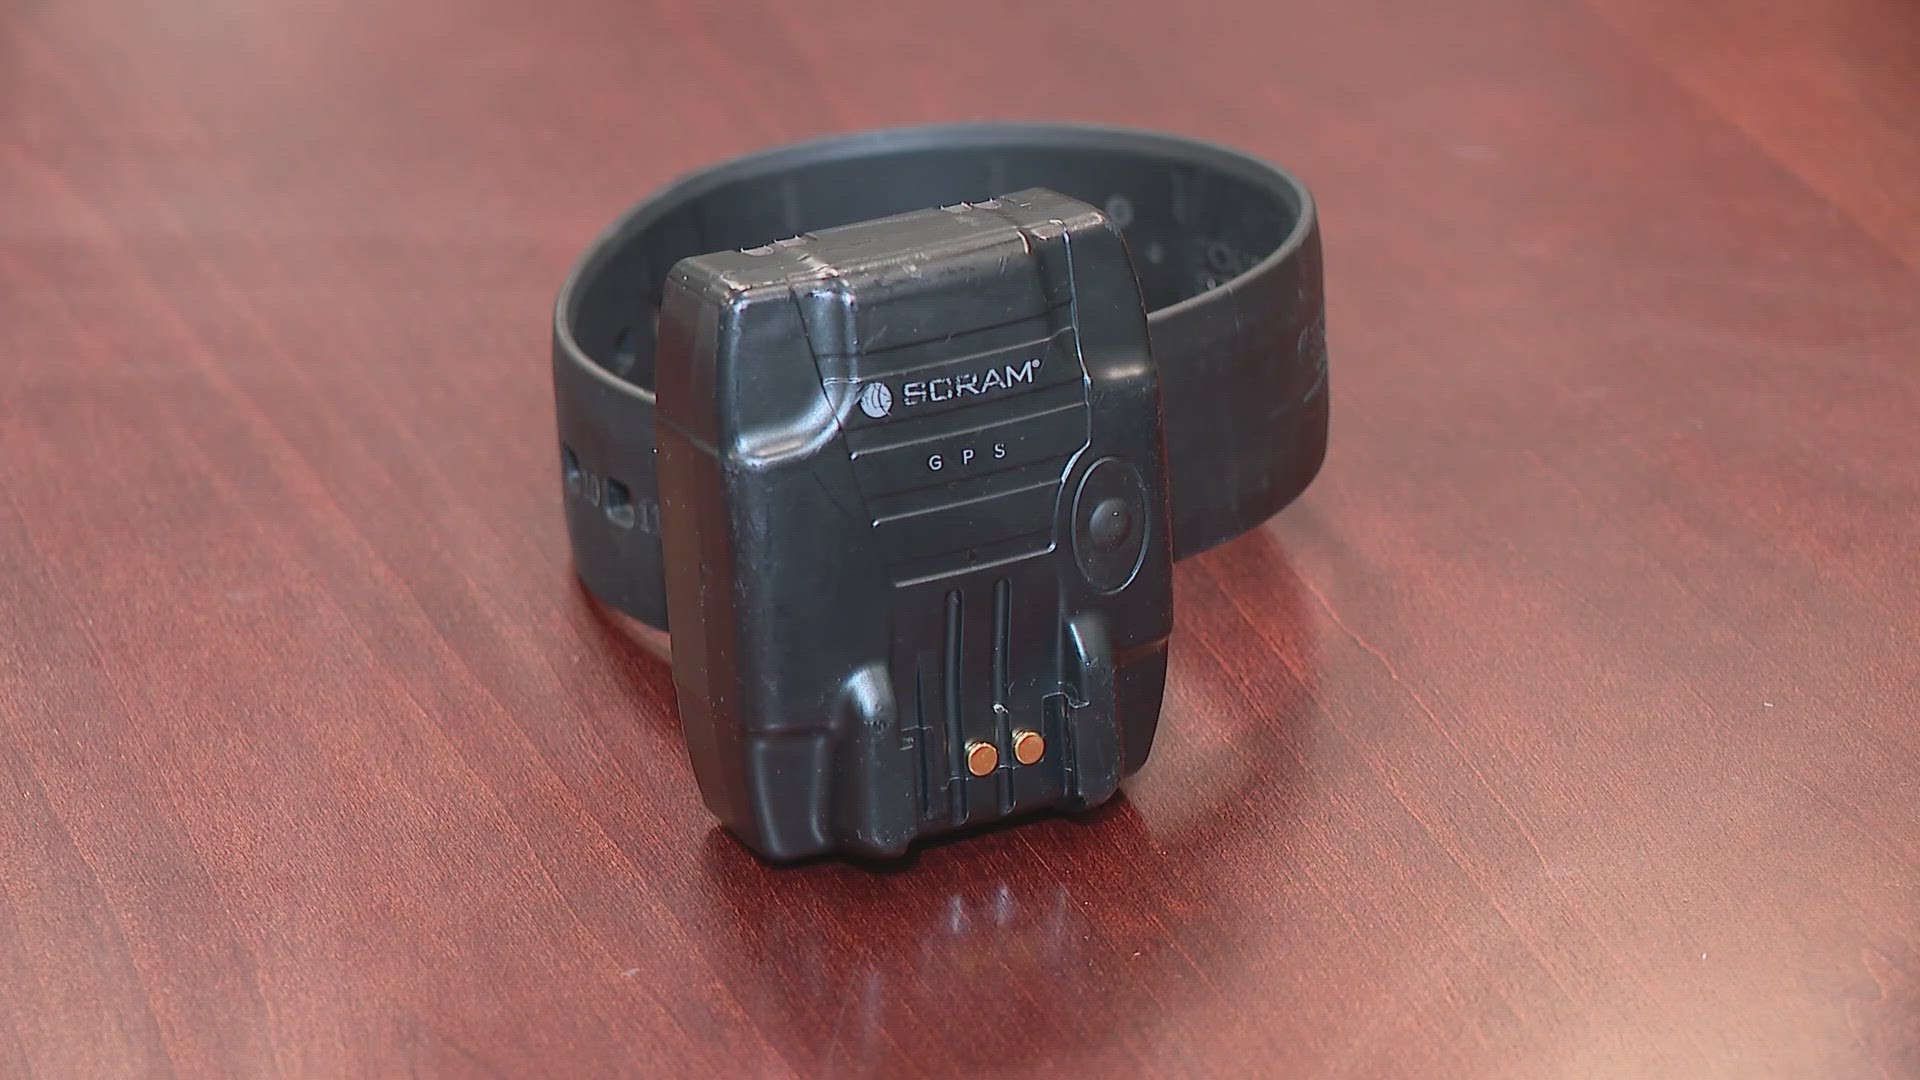 Ankle monitors allow the courts to monitor juveniles while keeping space in the detention center open for violent offenders.